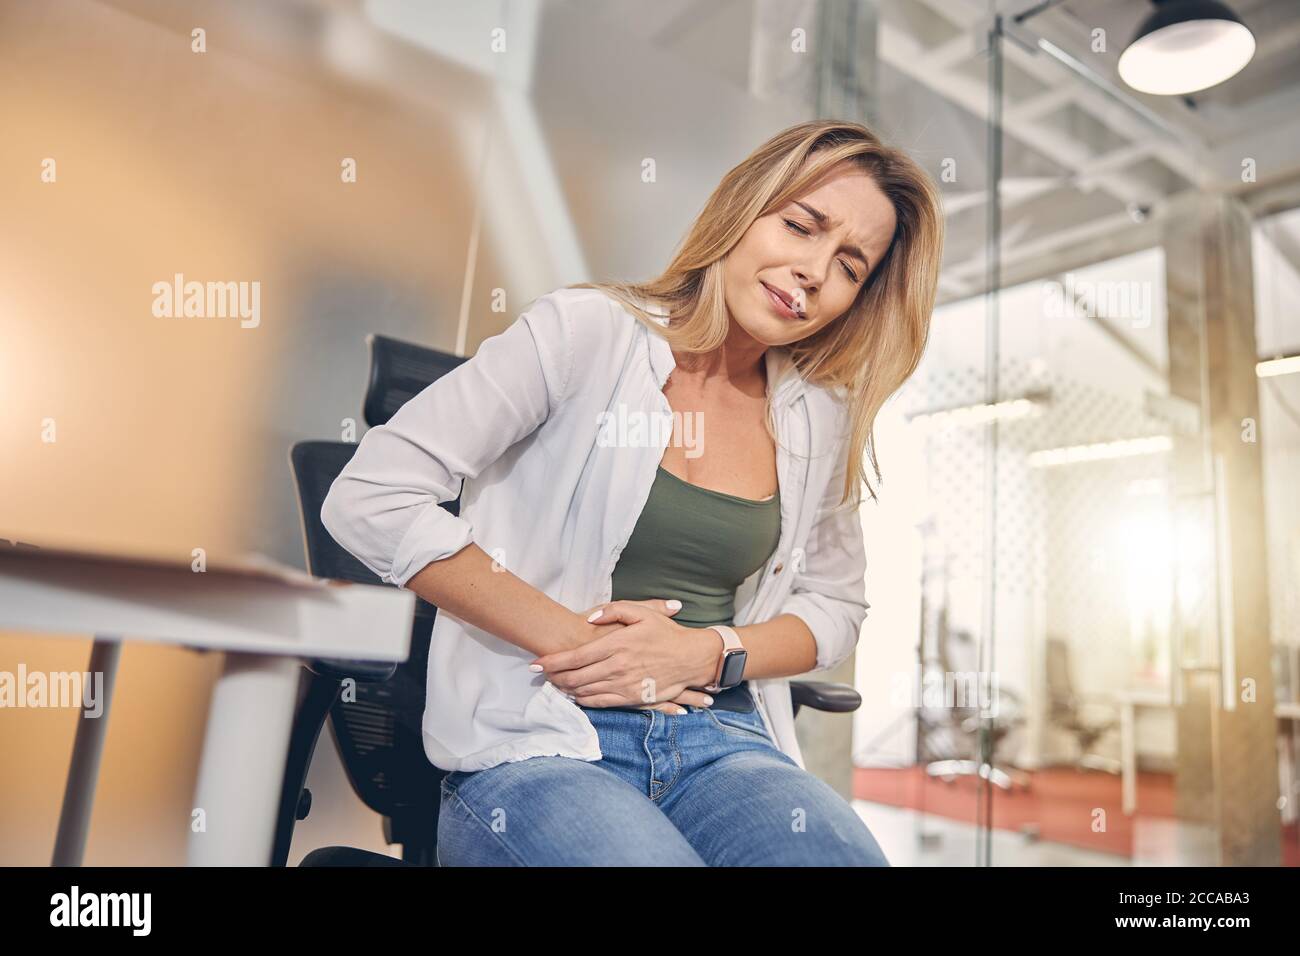 Upset young woman suffering from stomachache in office Stock Photo